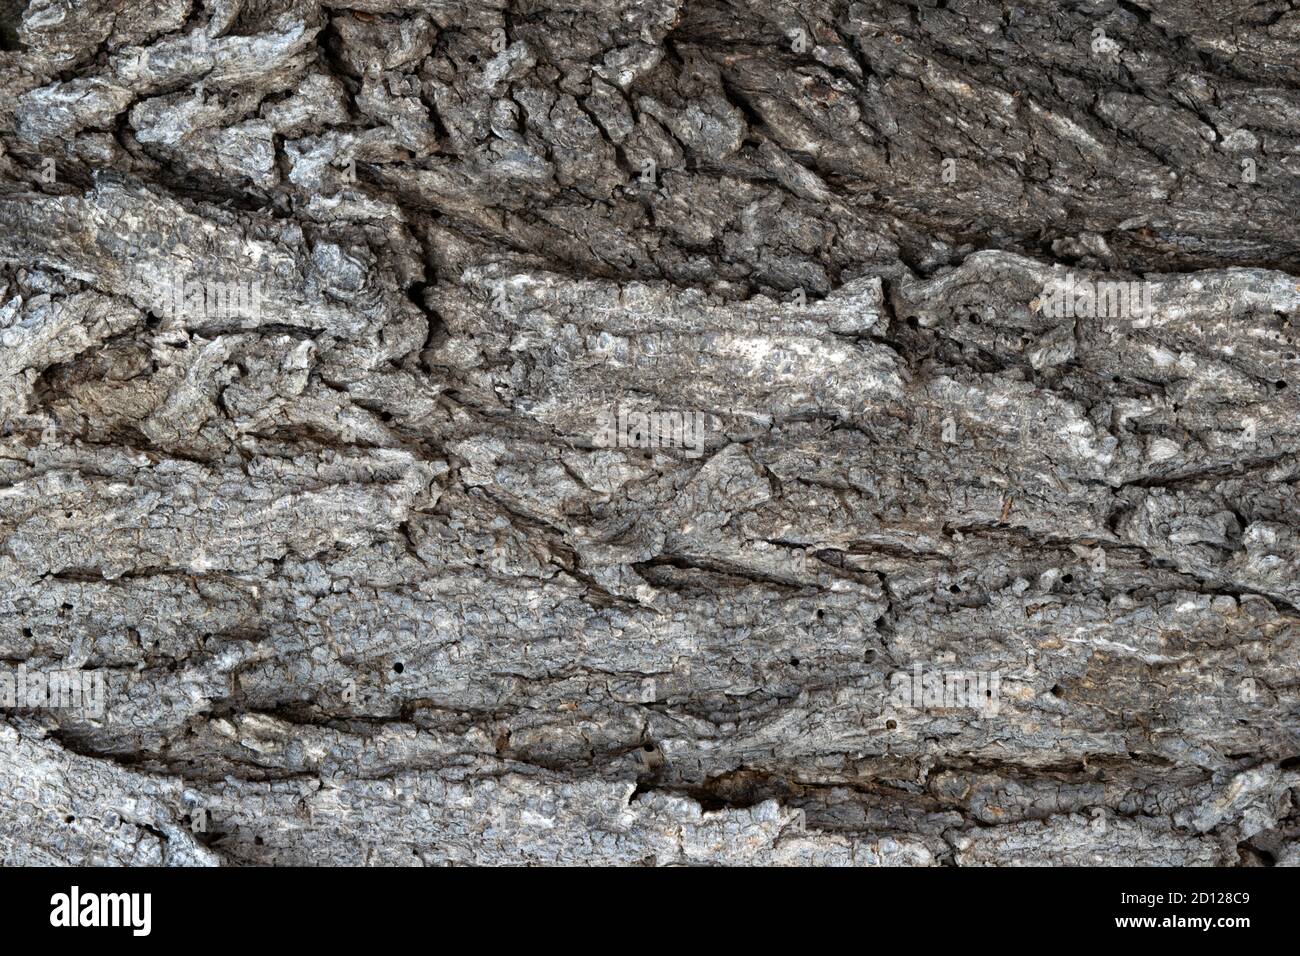 image of a section of old elm bark for a background or texture Stock Photo